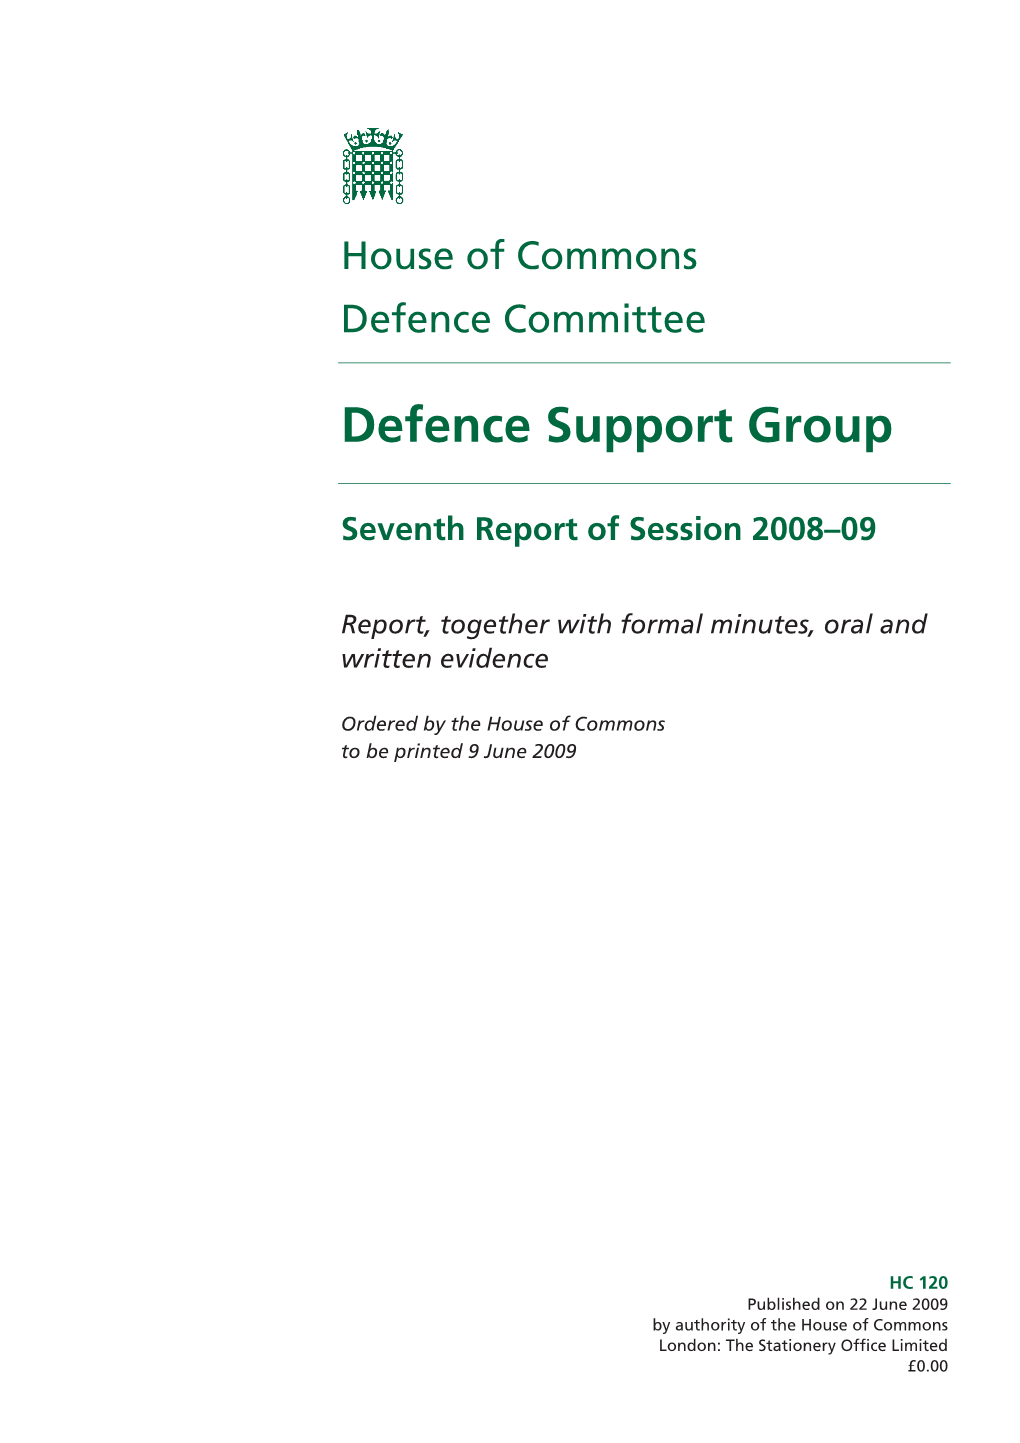 Defence Support Group